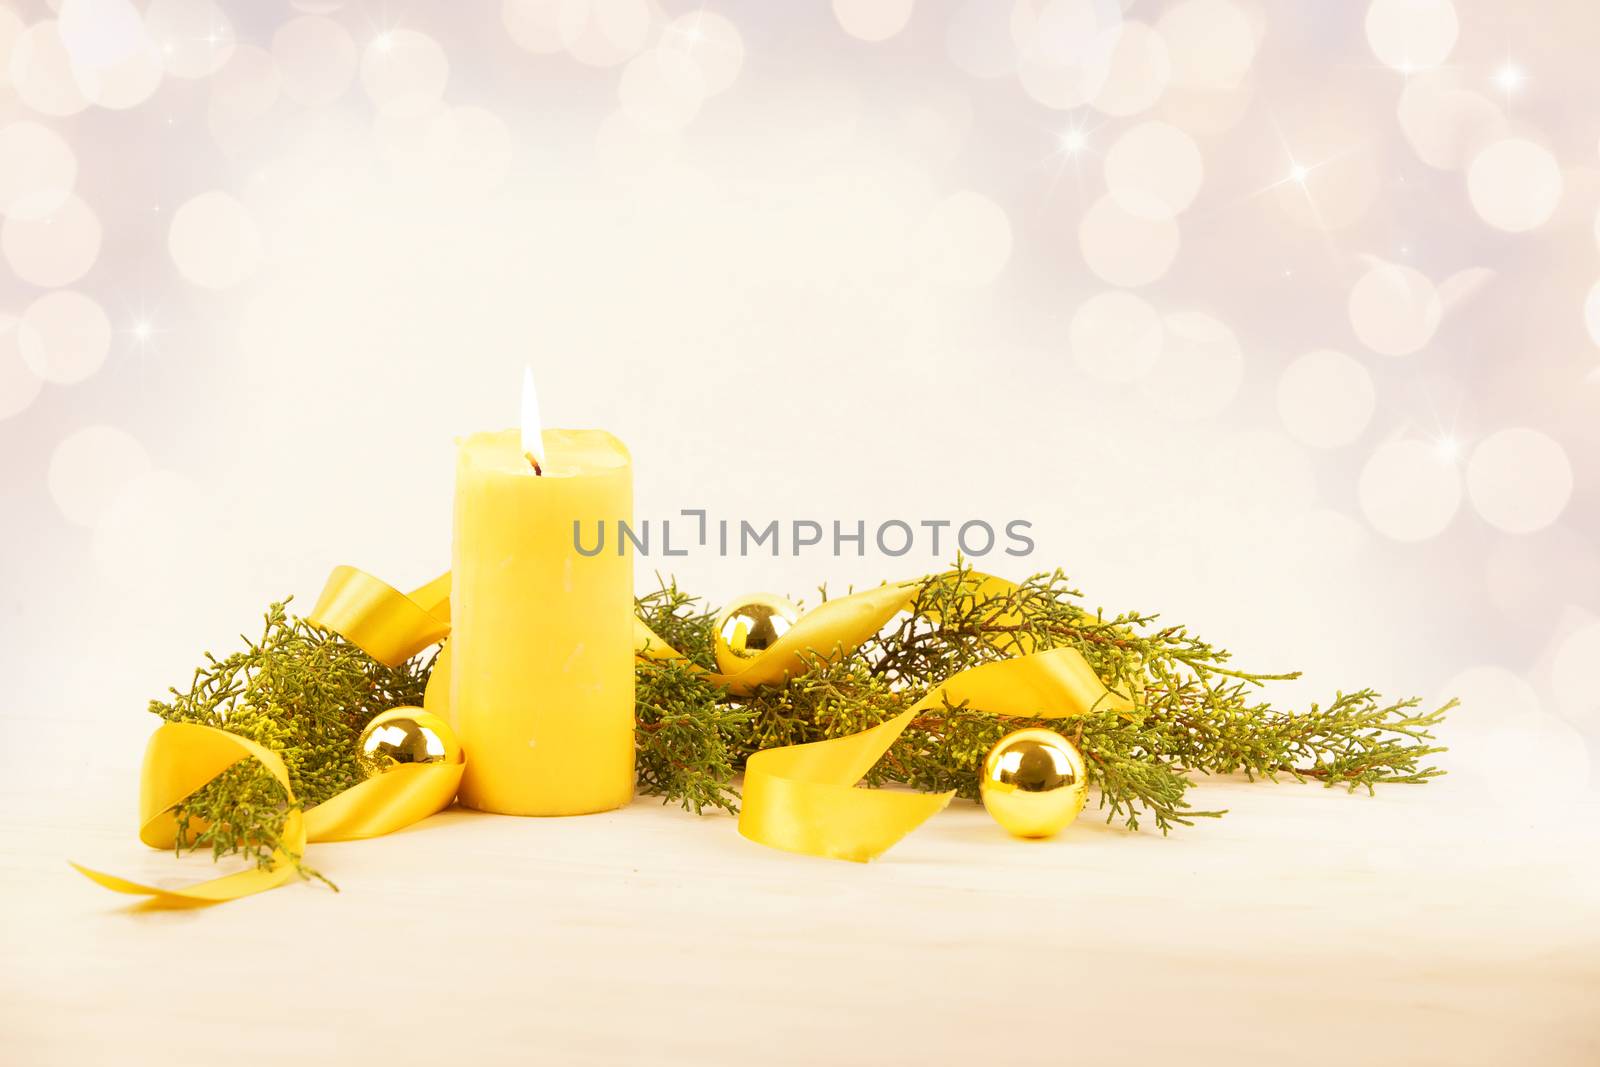 Christmas copy space with a lit yellow candle, pine branches, golden satin ribbon and gold-colored Christmas balls on a light patterned background by robbyfontanesi